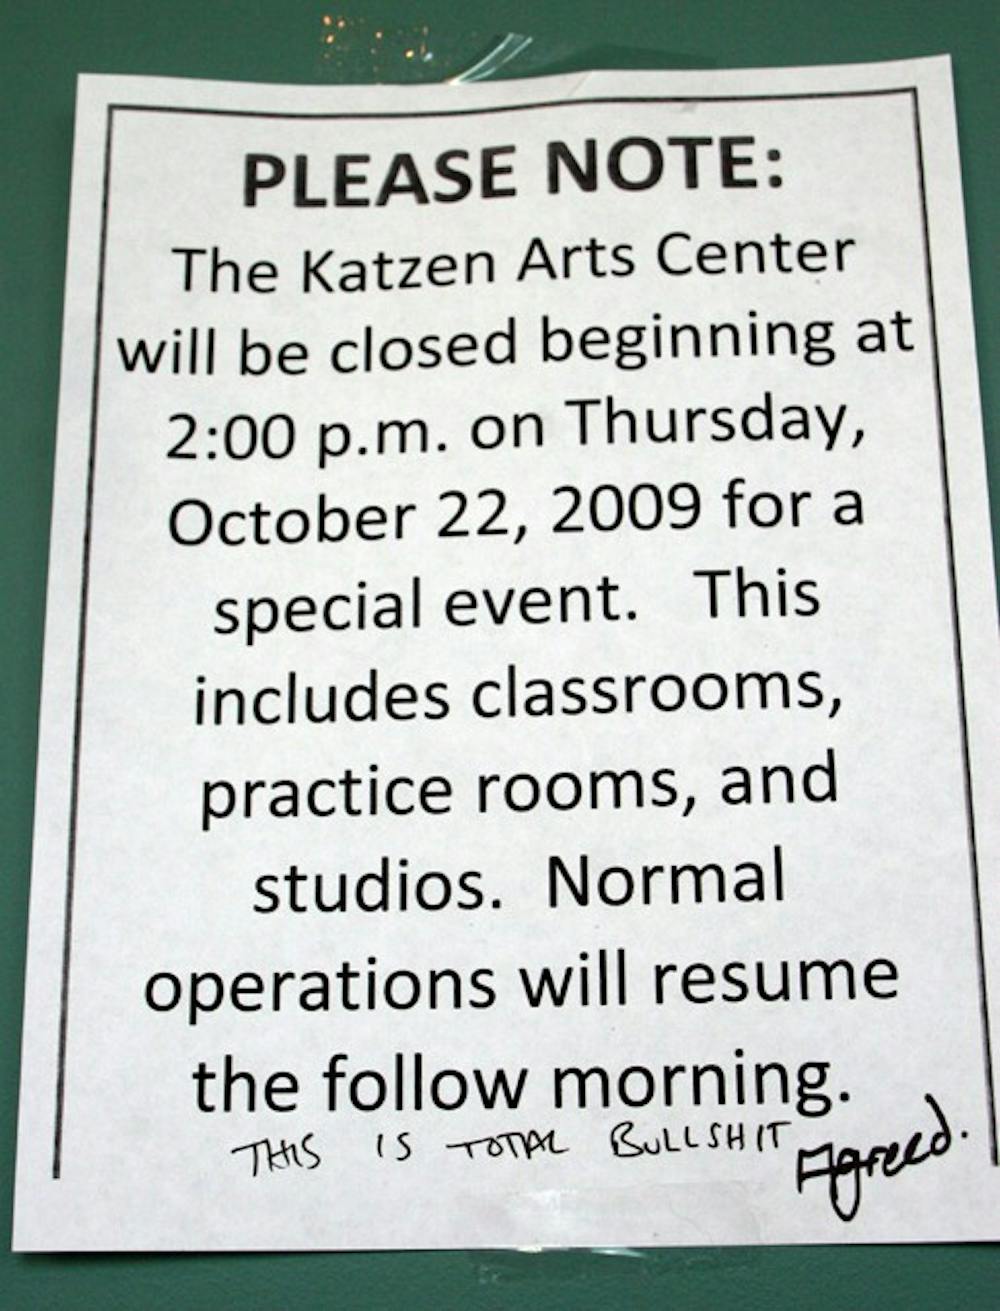 ACCESS DENIED â€” Katzen classes, studios and practice rooms will be off-limits today from 2-10 p.m. for a annual university event. Students expressed their frustration by writing on the sign in Katzen. The annual dinner honors major donors to the university.